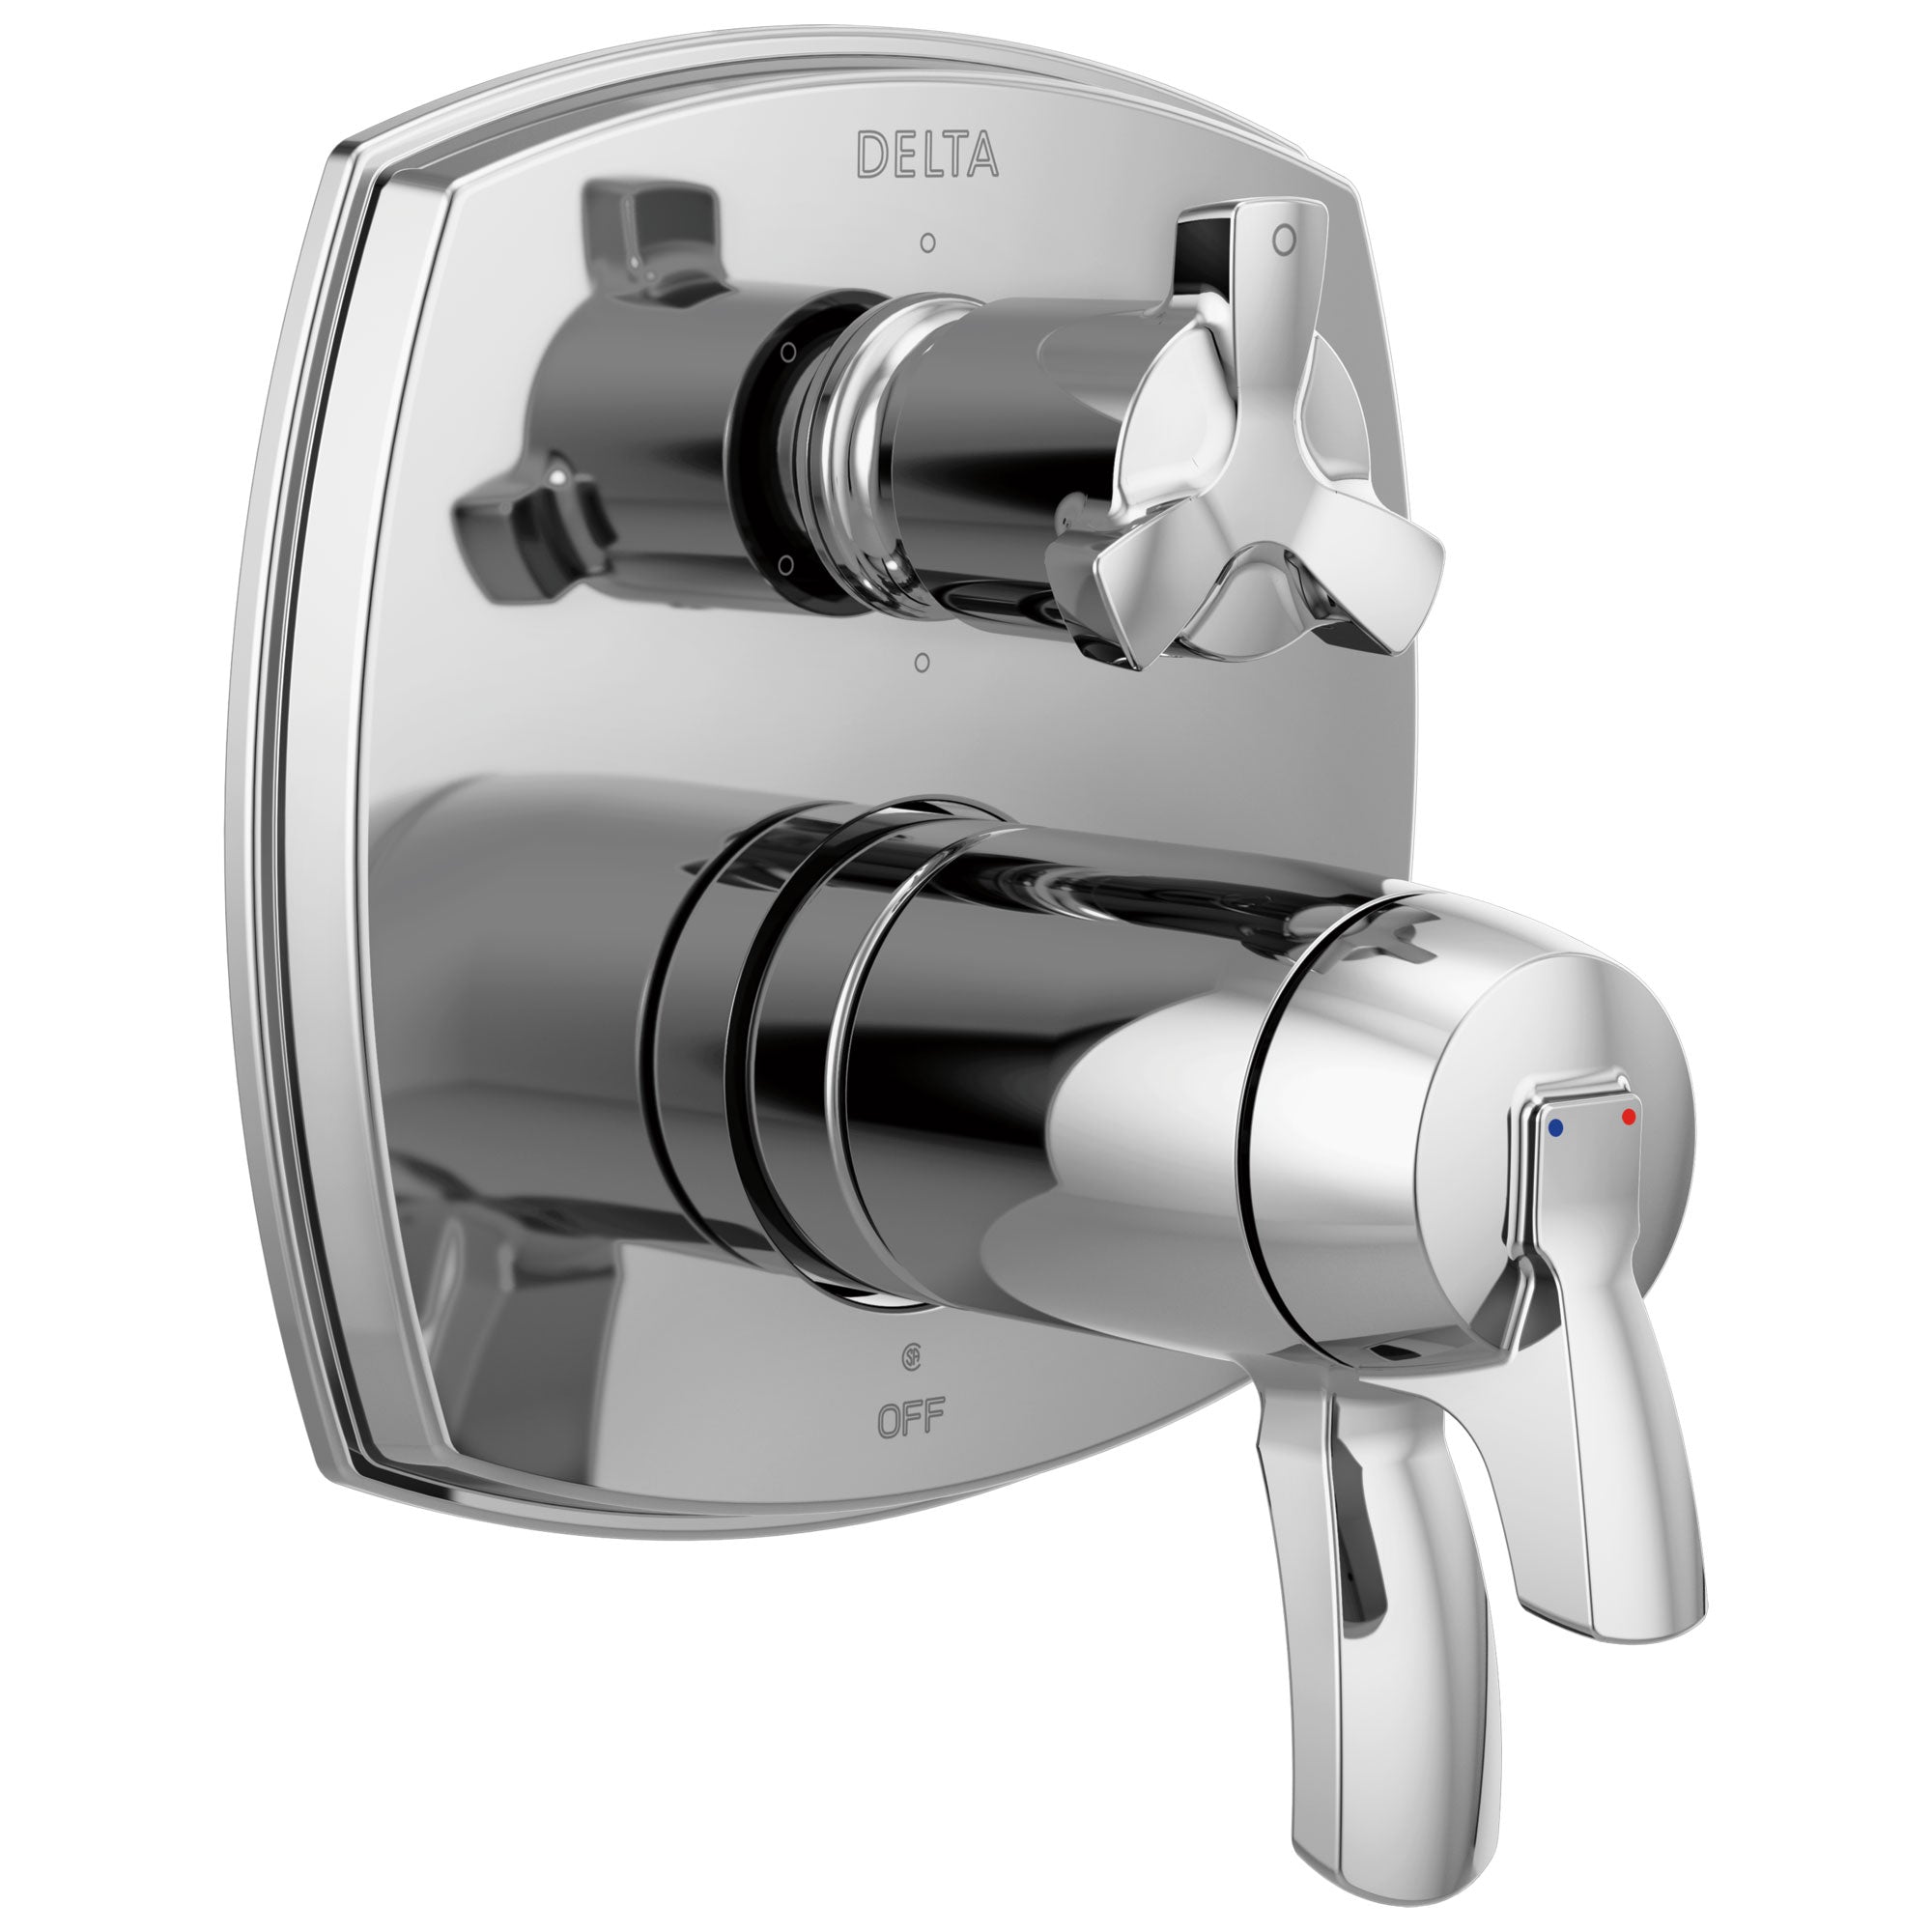 Delta Stryke Chrome Finish Thermostatic Shower System Control with 6 Setting Integrated Cross Handle Diverter Includes Valve & Handles D3078V